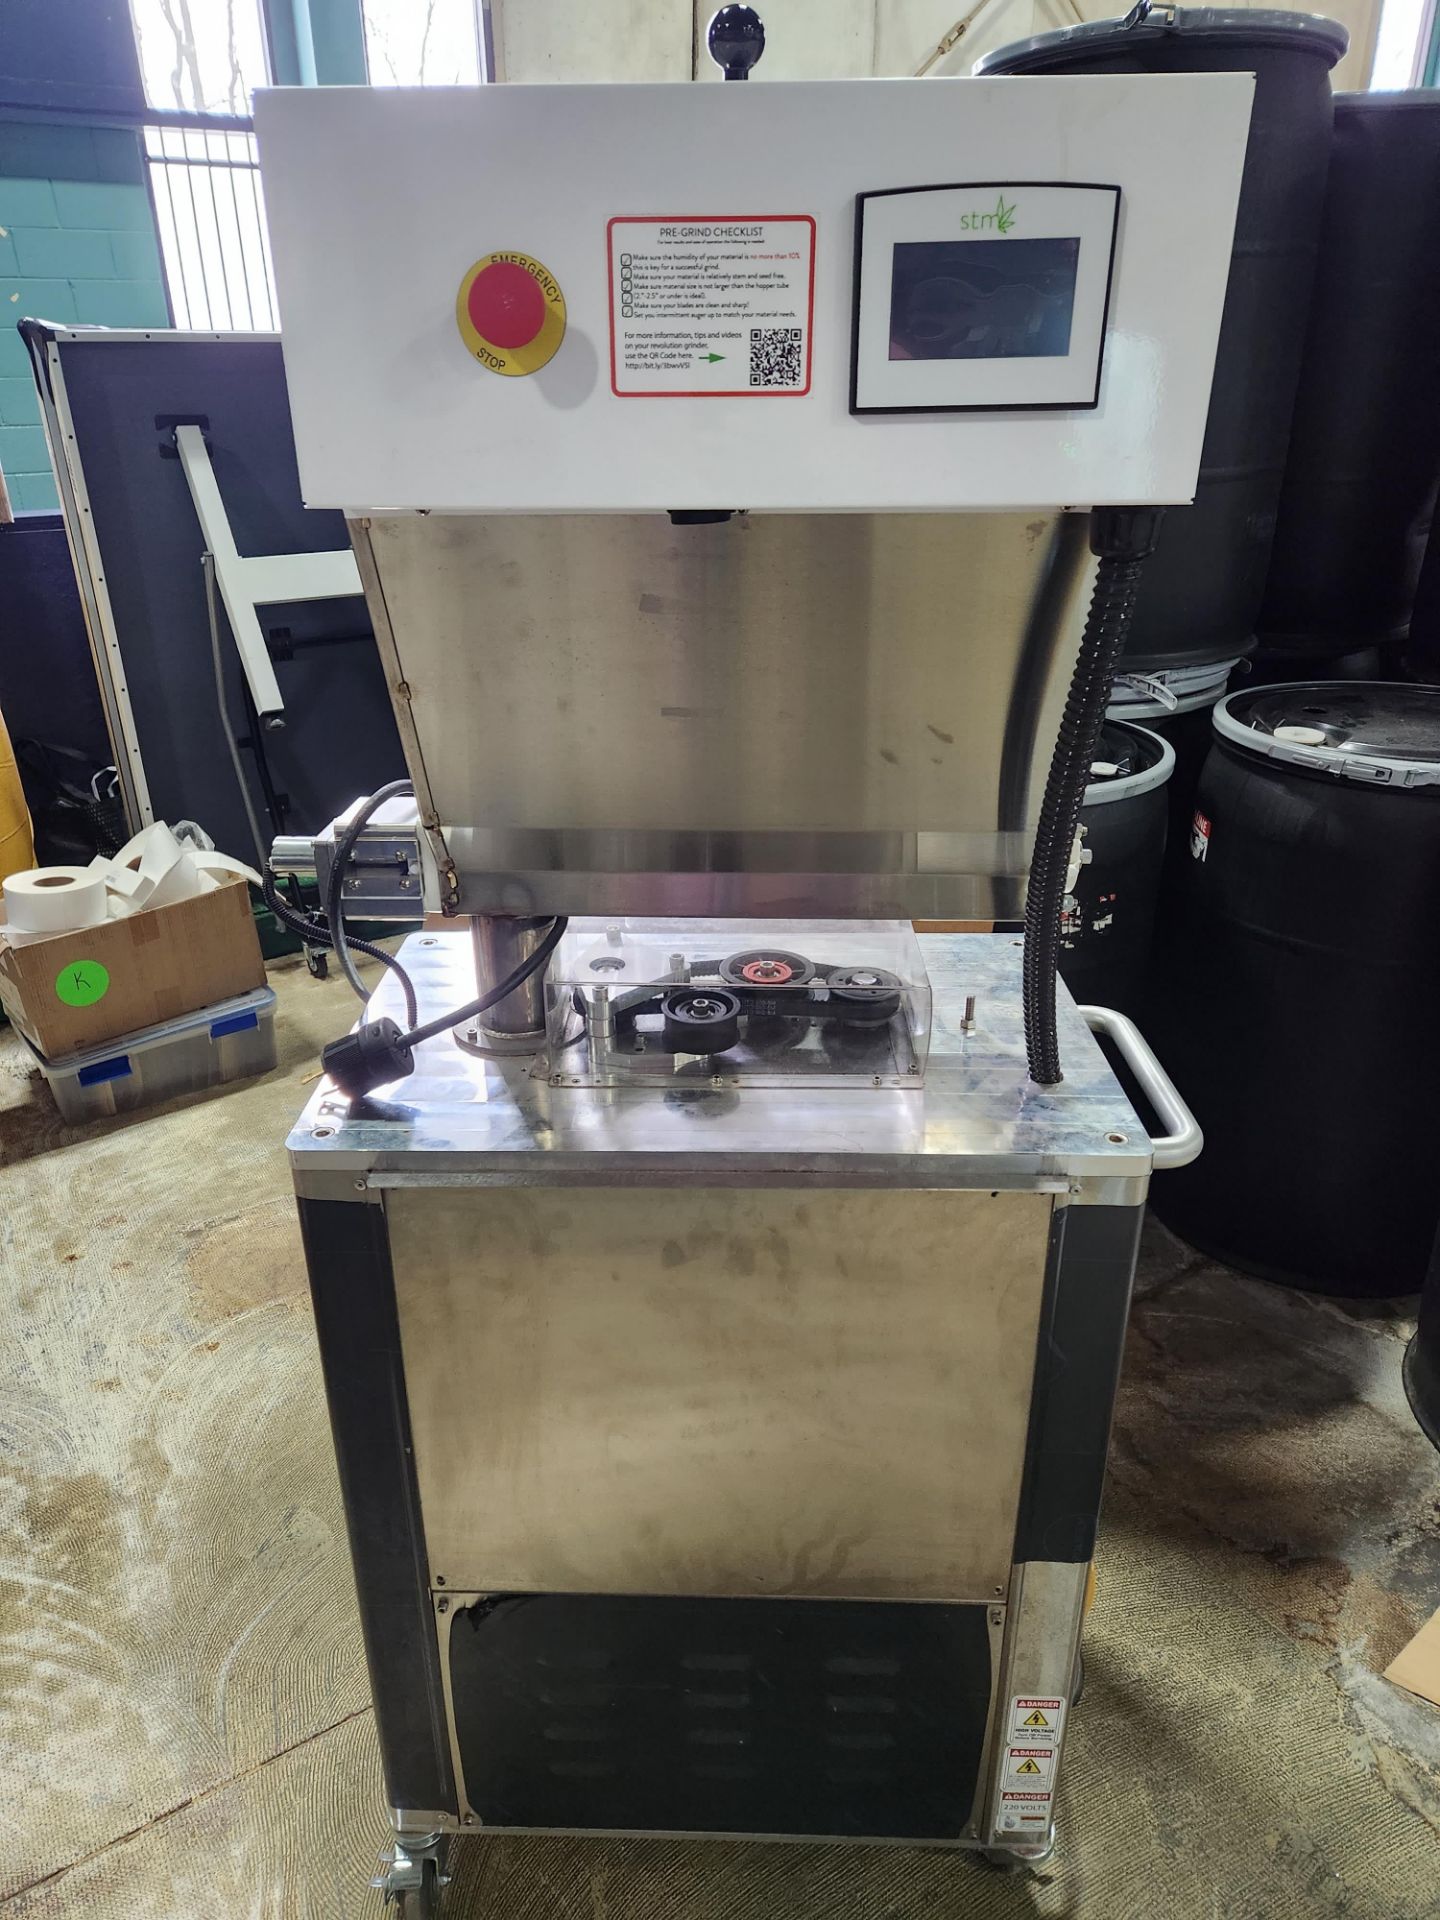 (Located in Somerset, MA) Sesh Technologies Milling Machine, Model# RV-STM-1, Serial# 156, 240V